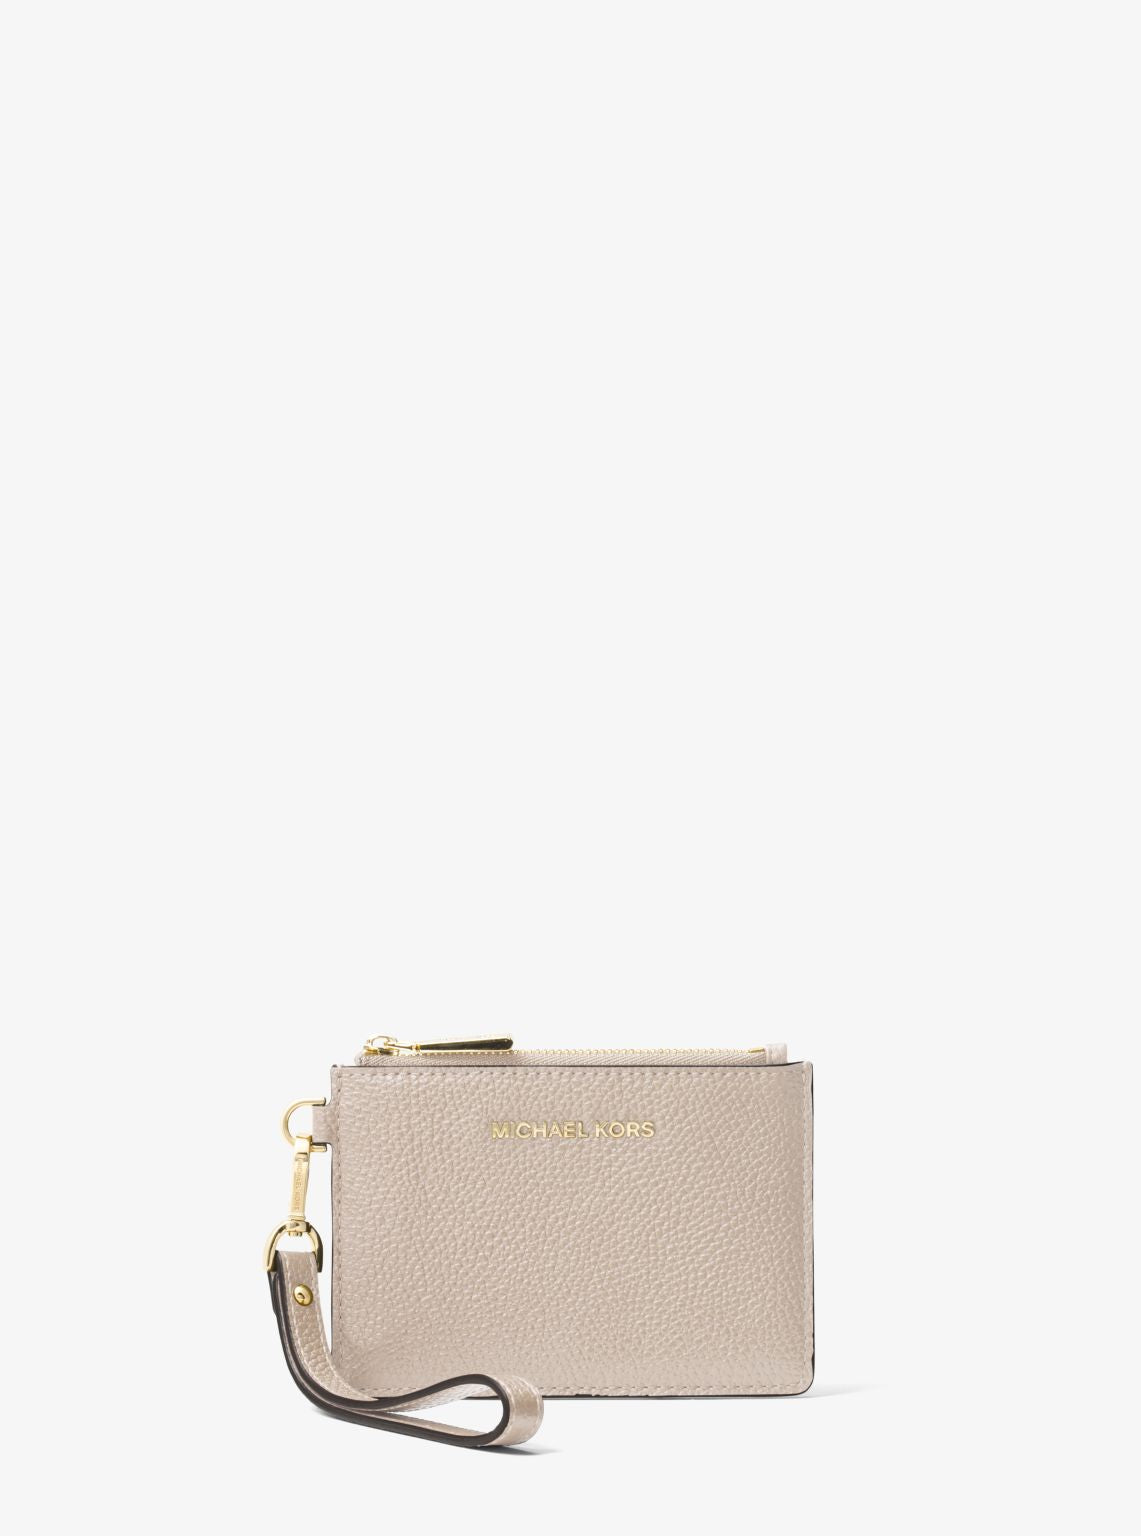 Stylish Michael Kors Coin Pouch Wallet with Key Ring